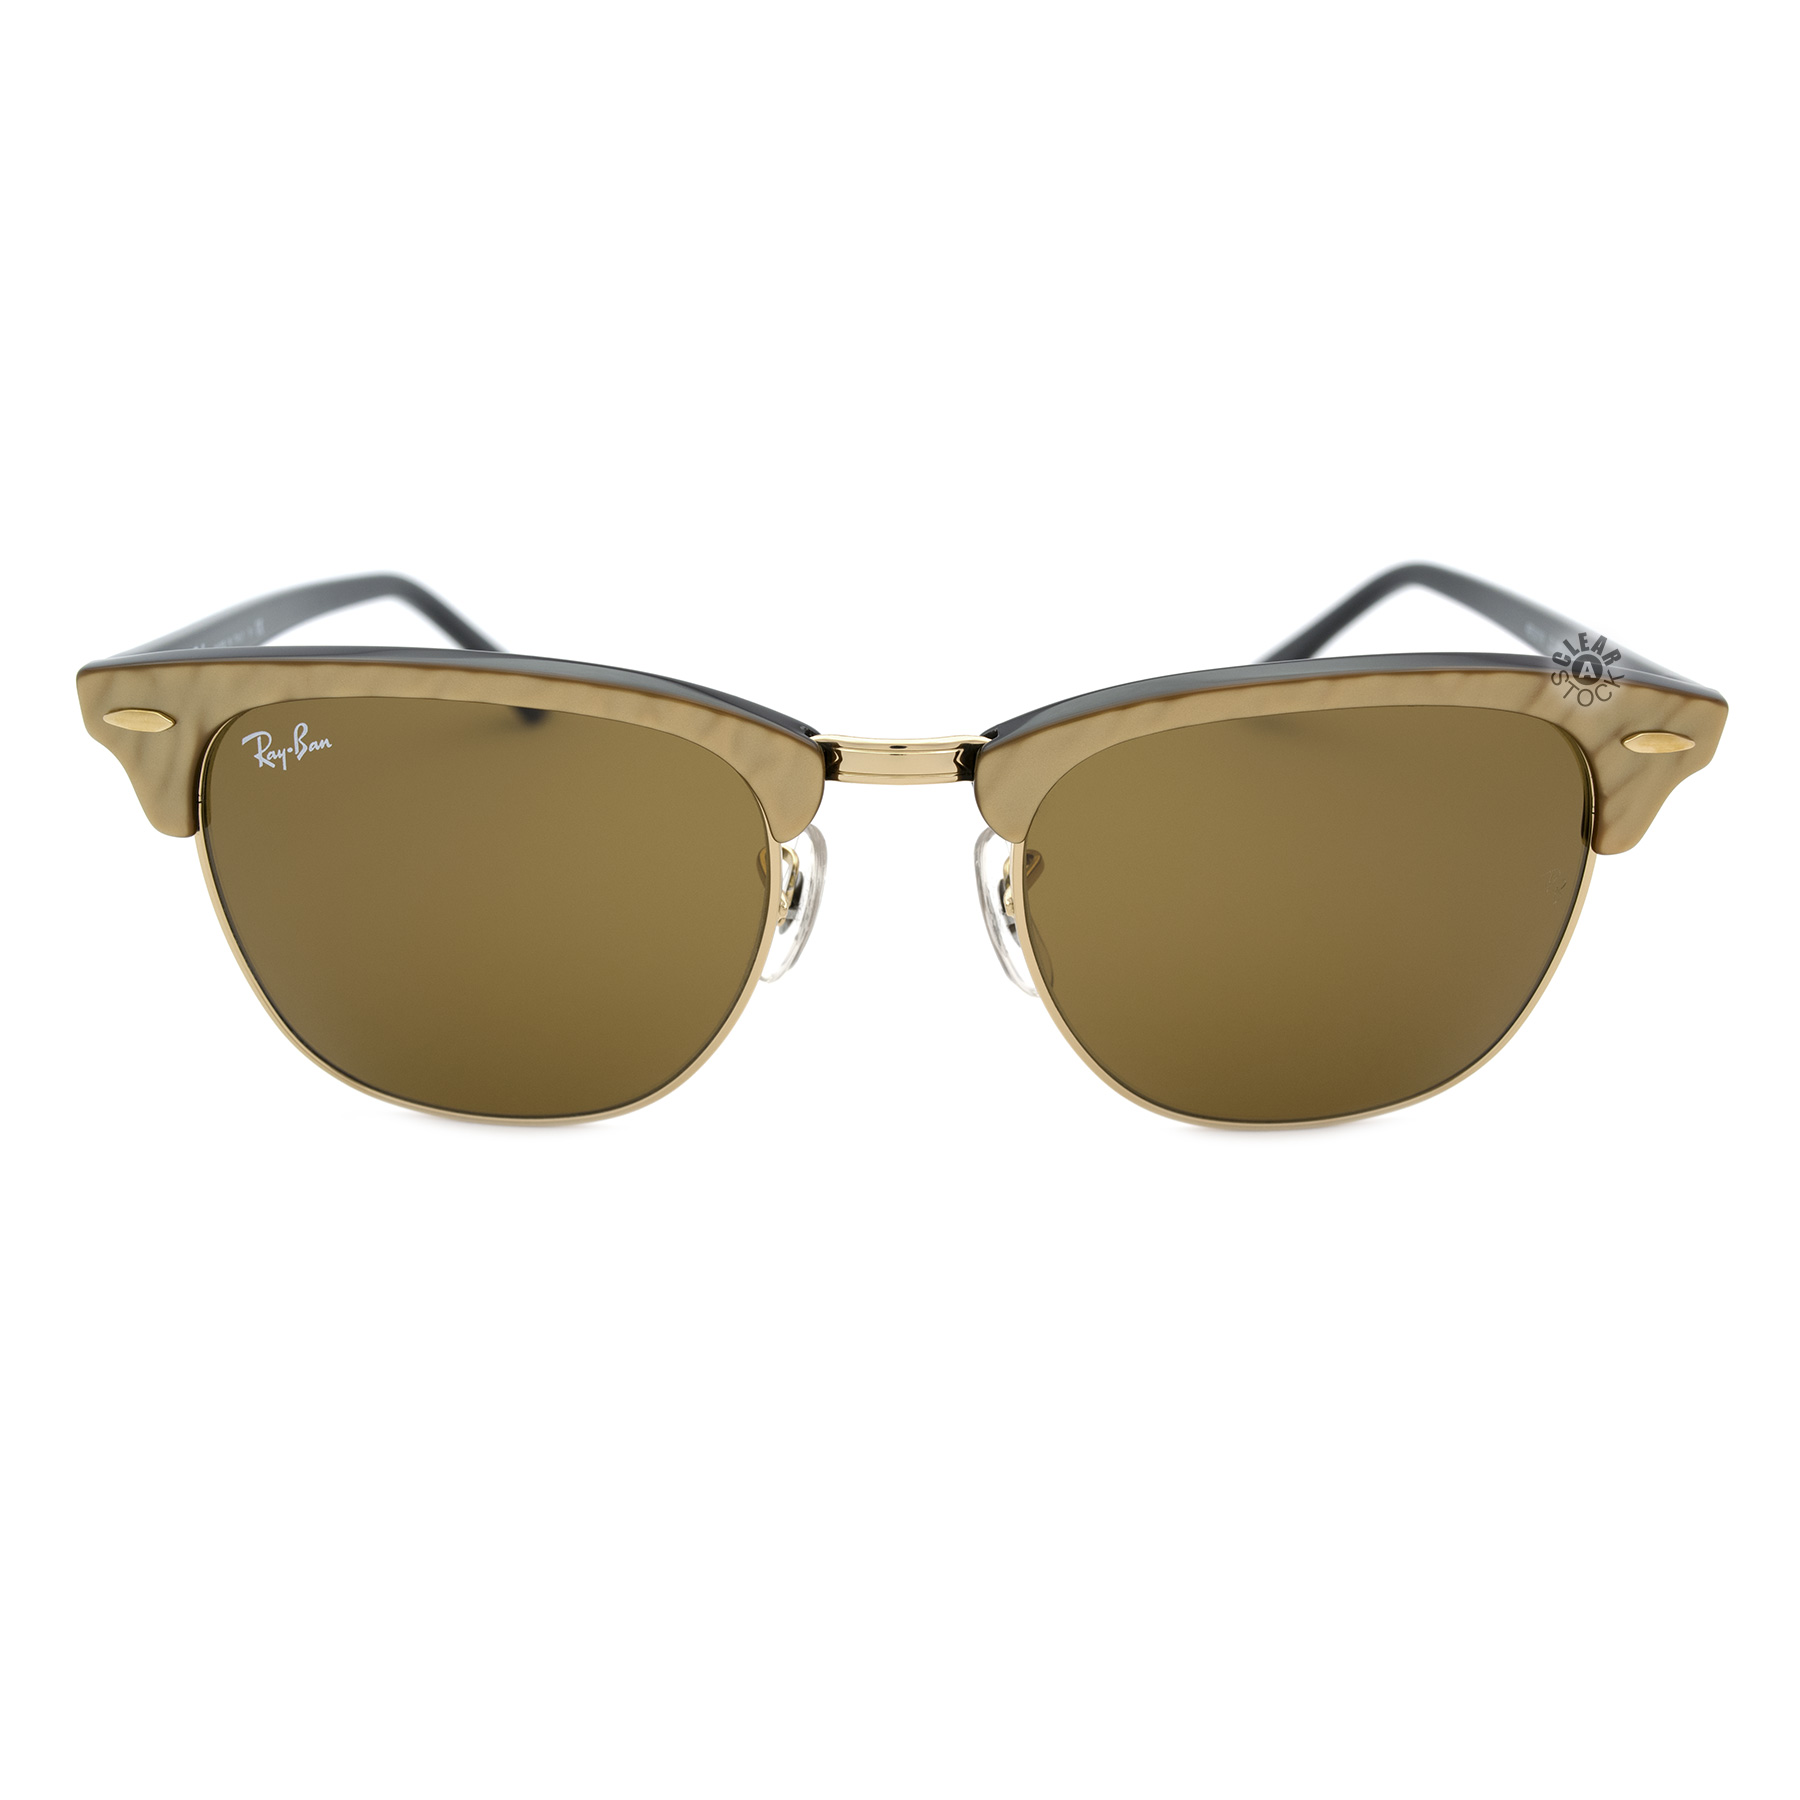 clubmaster classic raybans